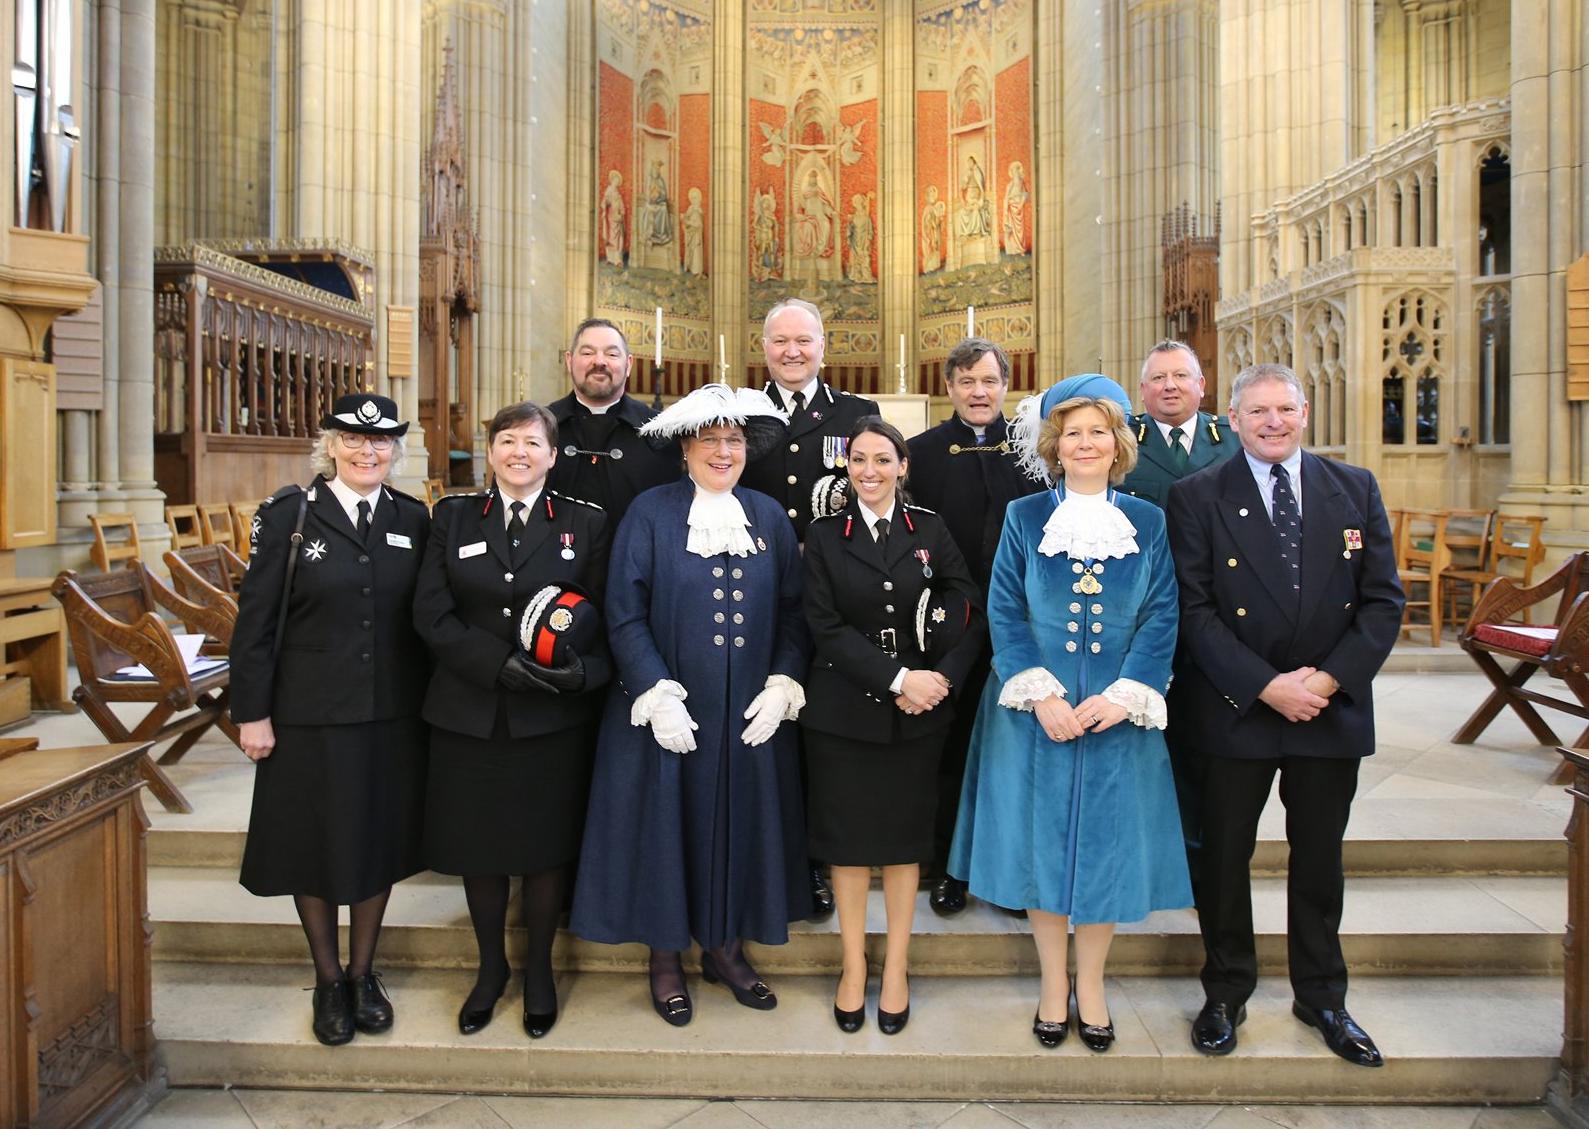 More than 400 emergency services staff came together today for the Blue Light Service at Lancing College Chapel